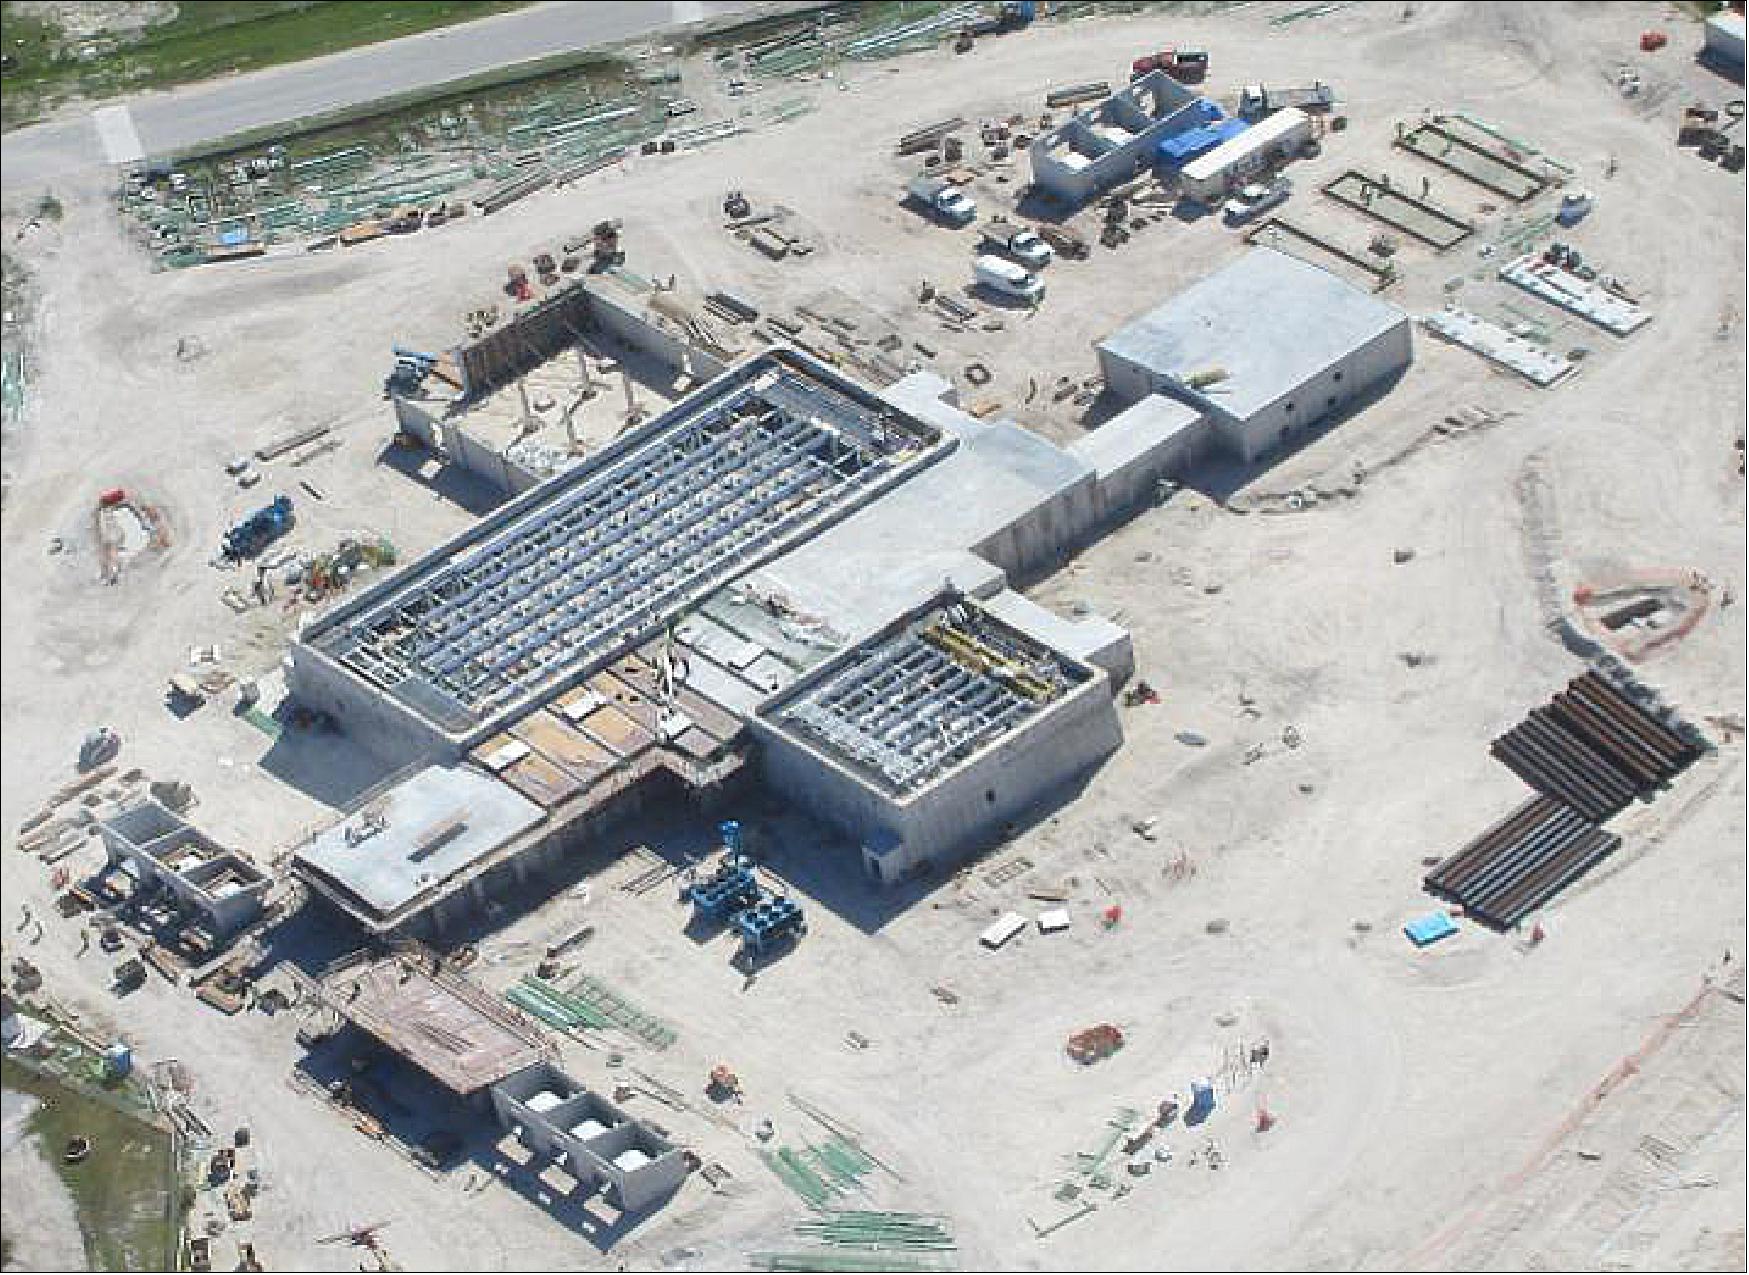 Figure 18: Aerial photo of the construction process on Sensor Site 1, acquired on Oct. 12, 2016 (image credit: Lockheed Martin)